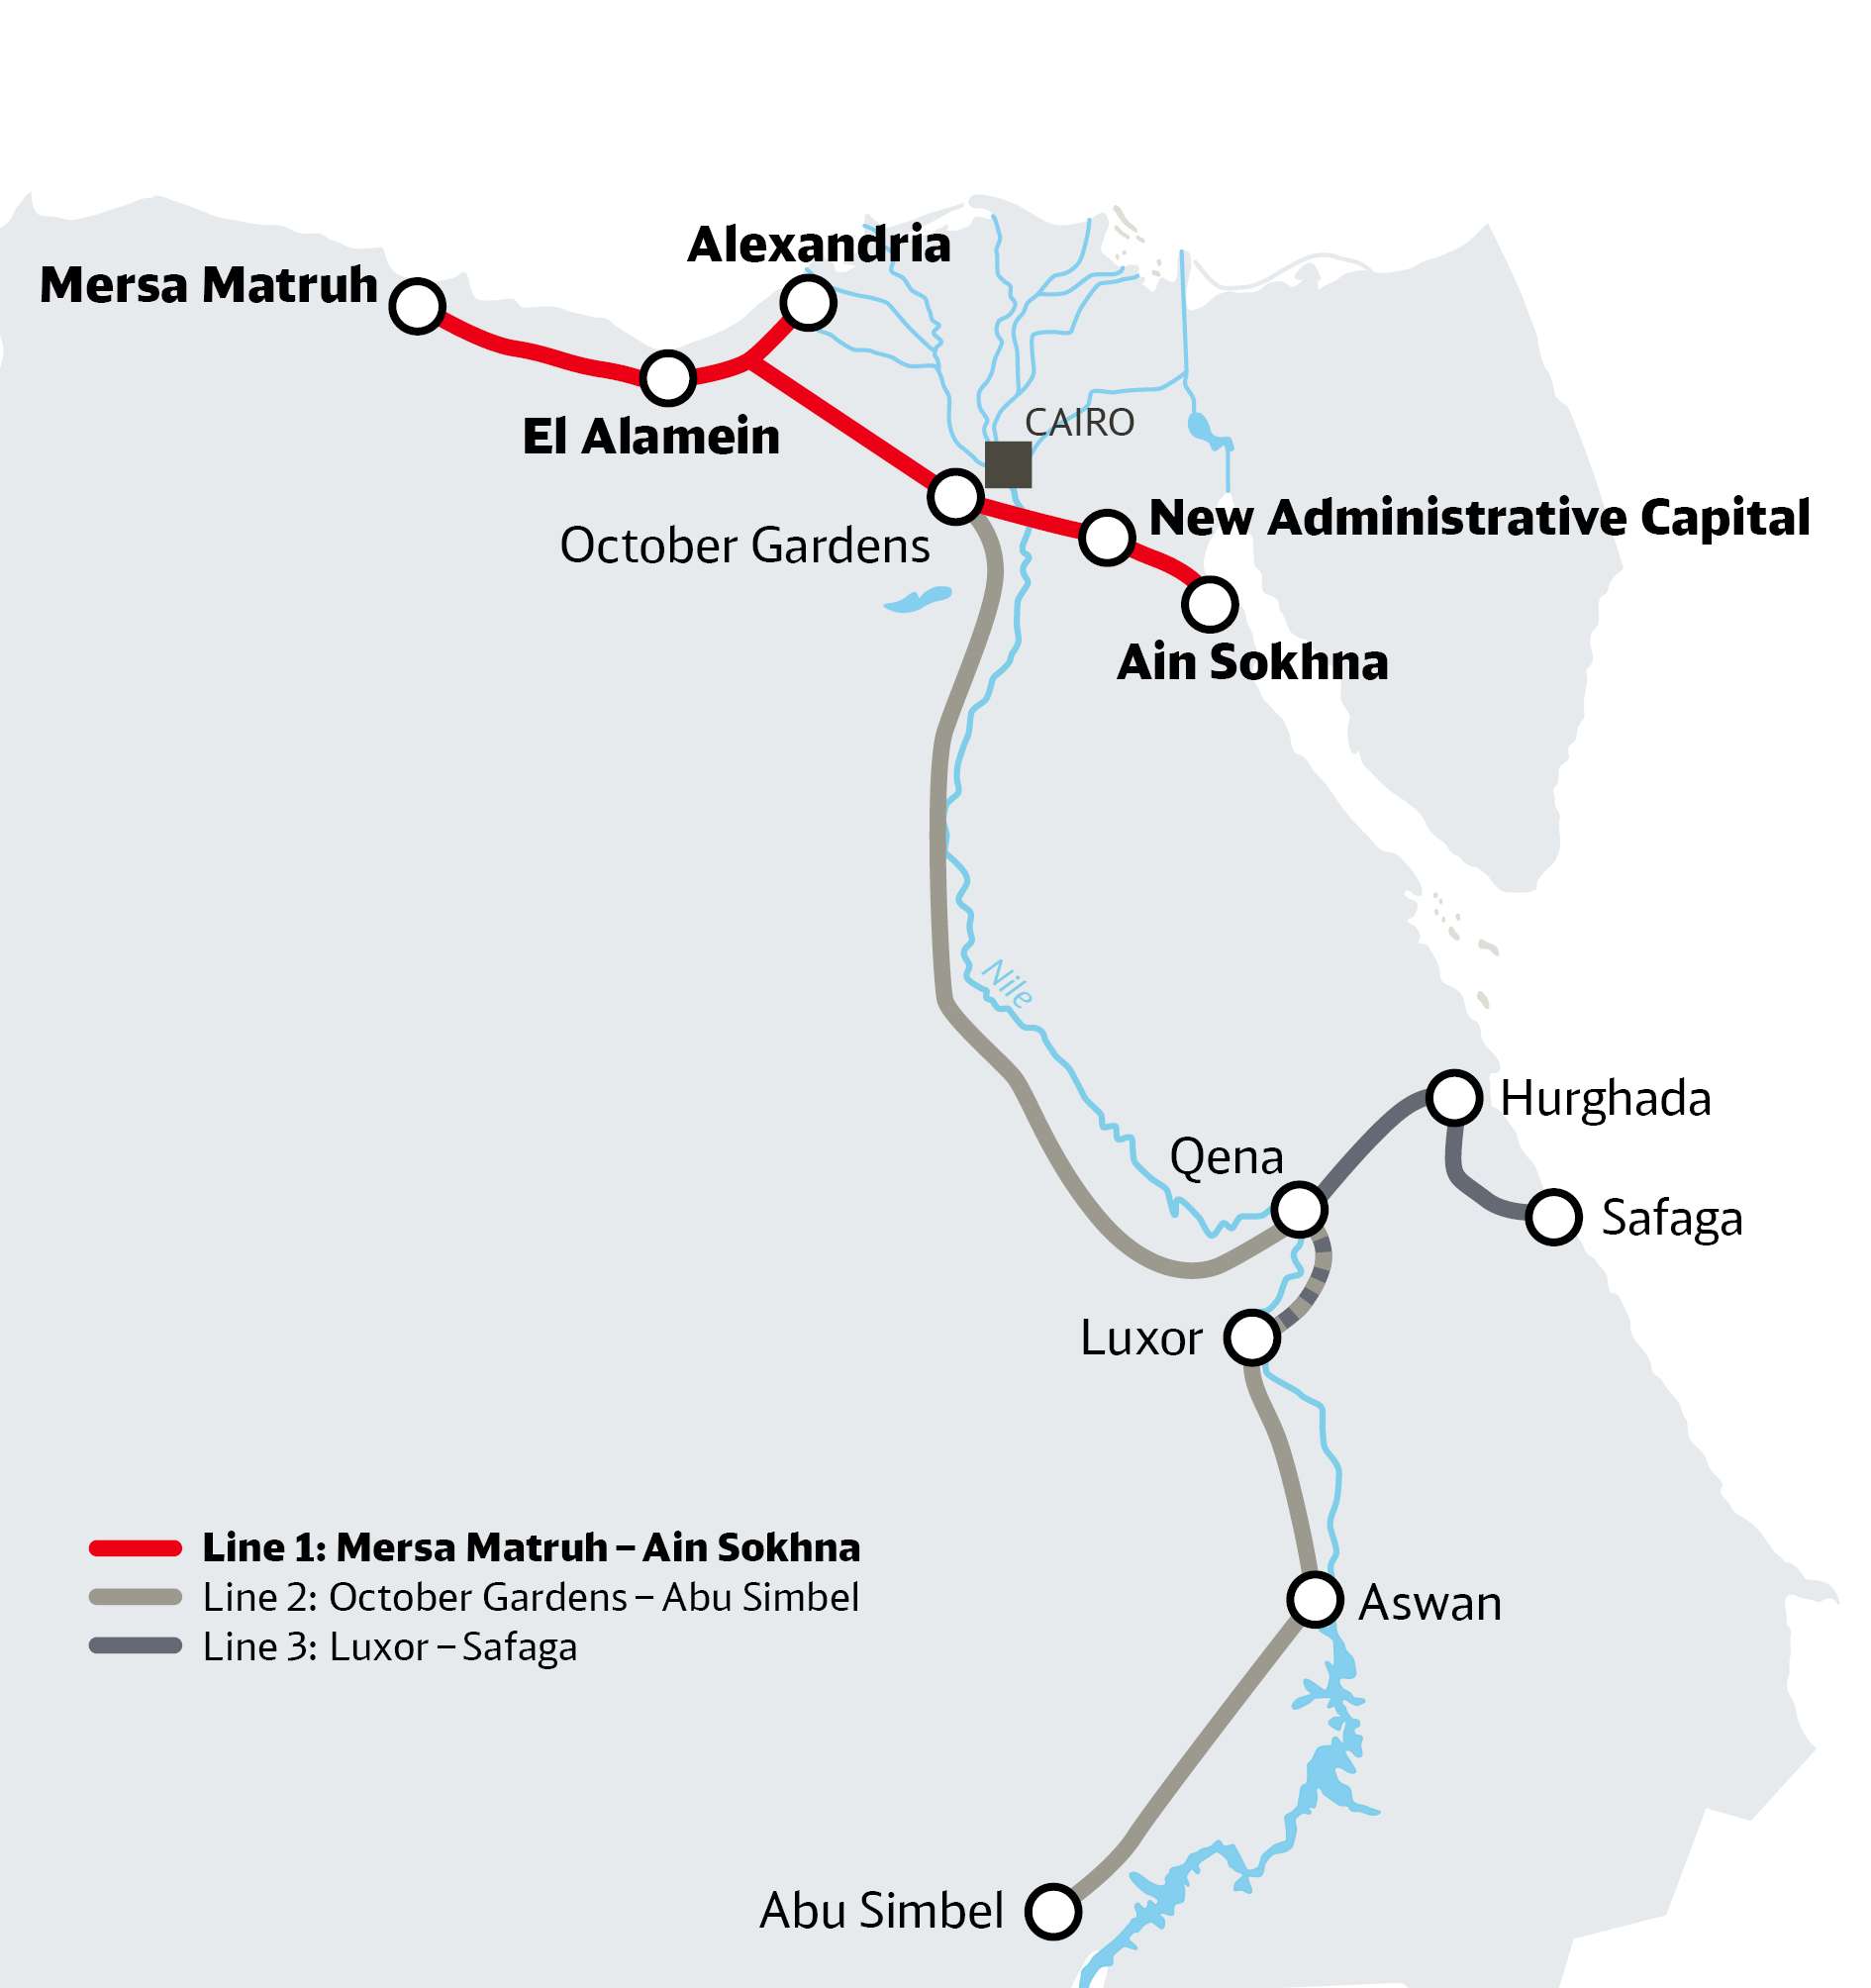 Suez canal on rails: the new lines will connect the Mediterranean and the Red Sea